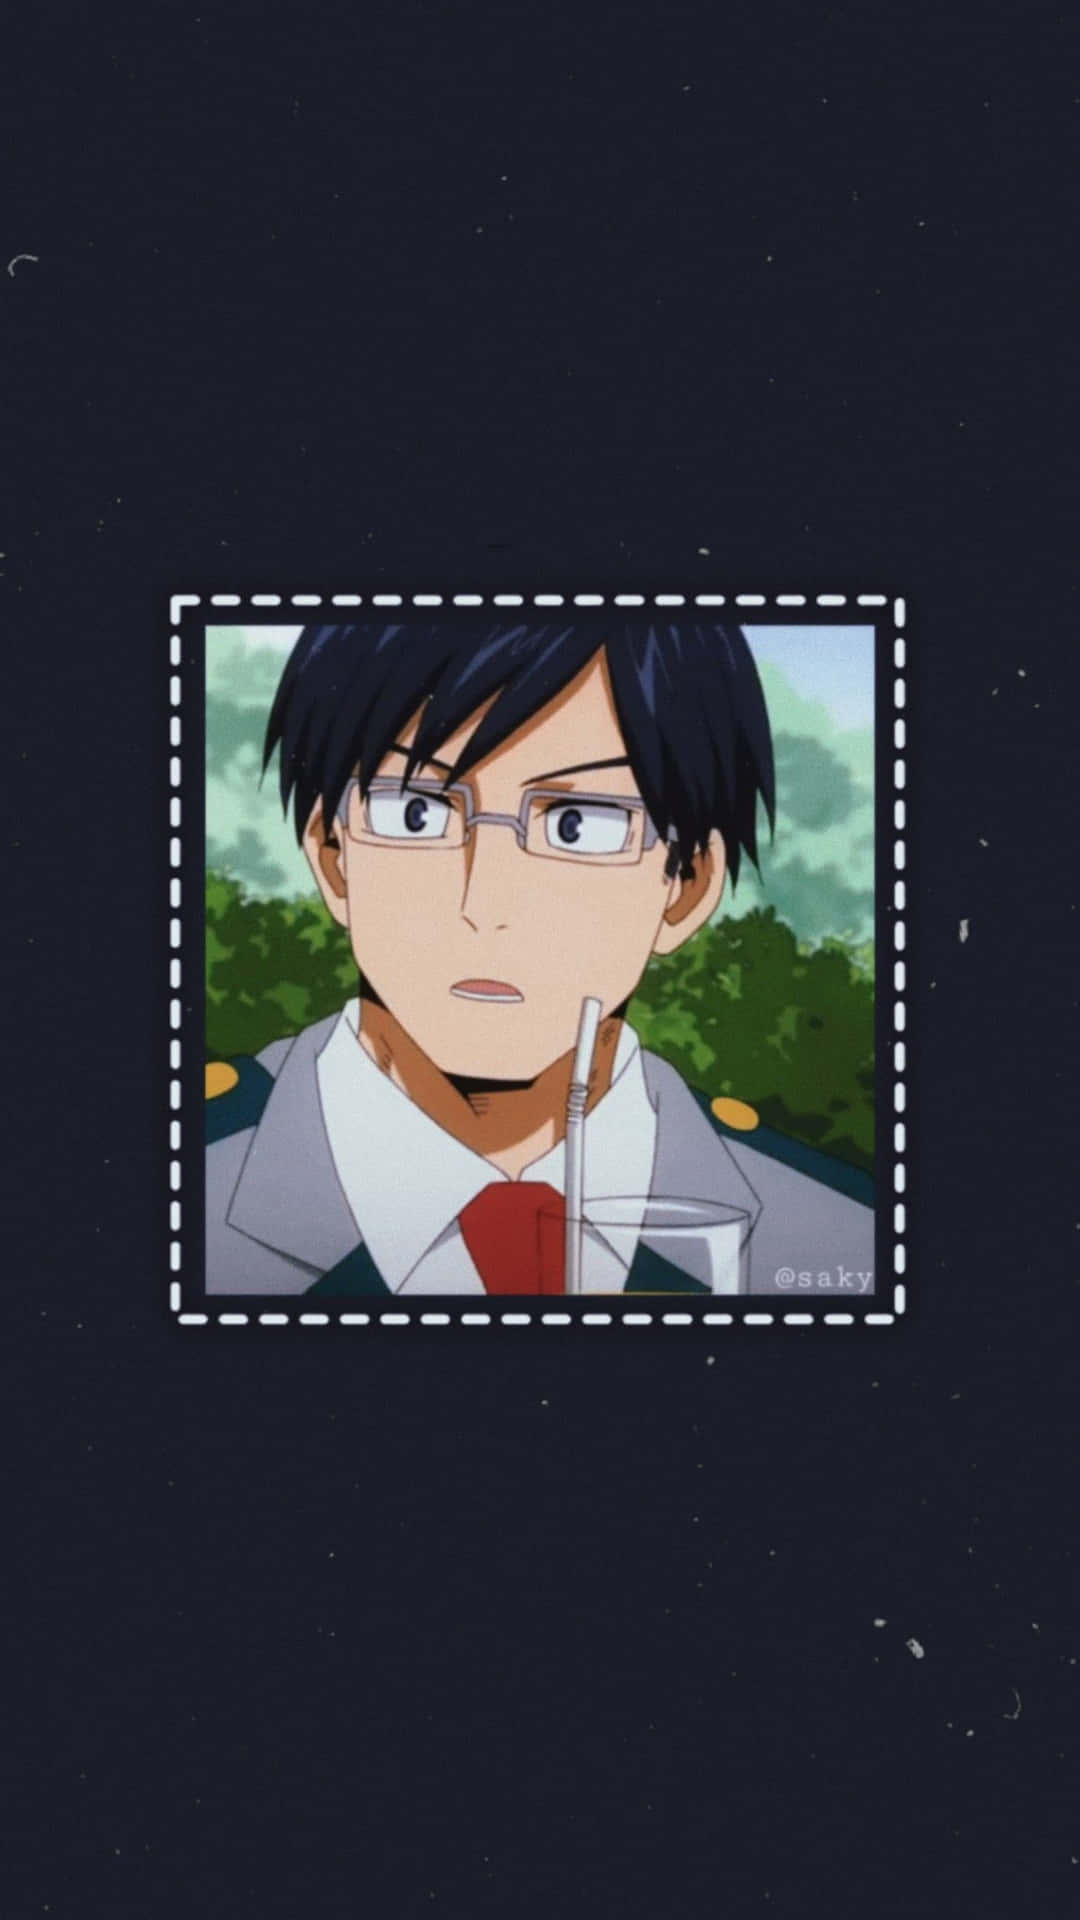 Tenya Iida – A true leader with a passion for justice Wallpaper